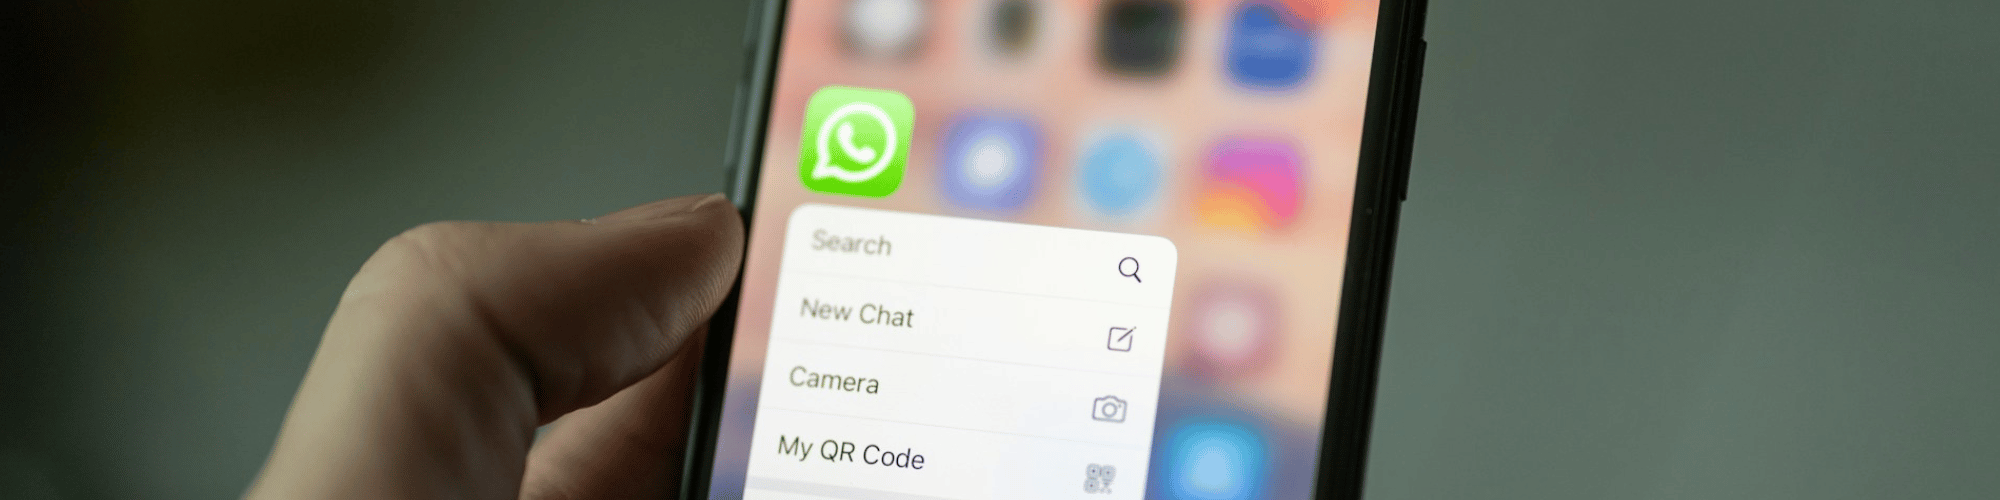 How to Set Up WhatsApp Business in South Africa?